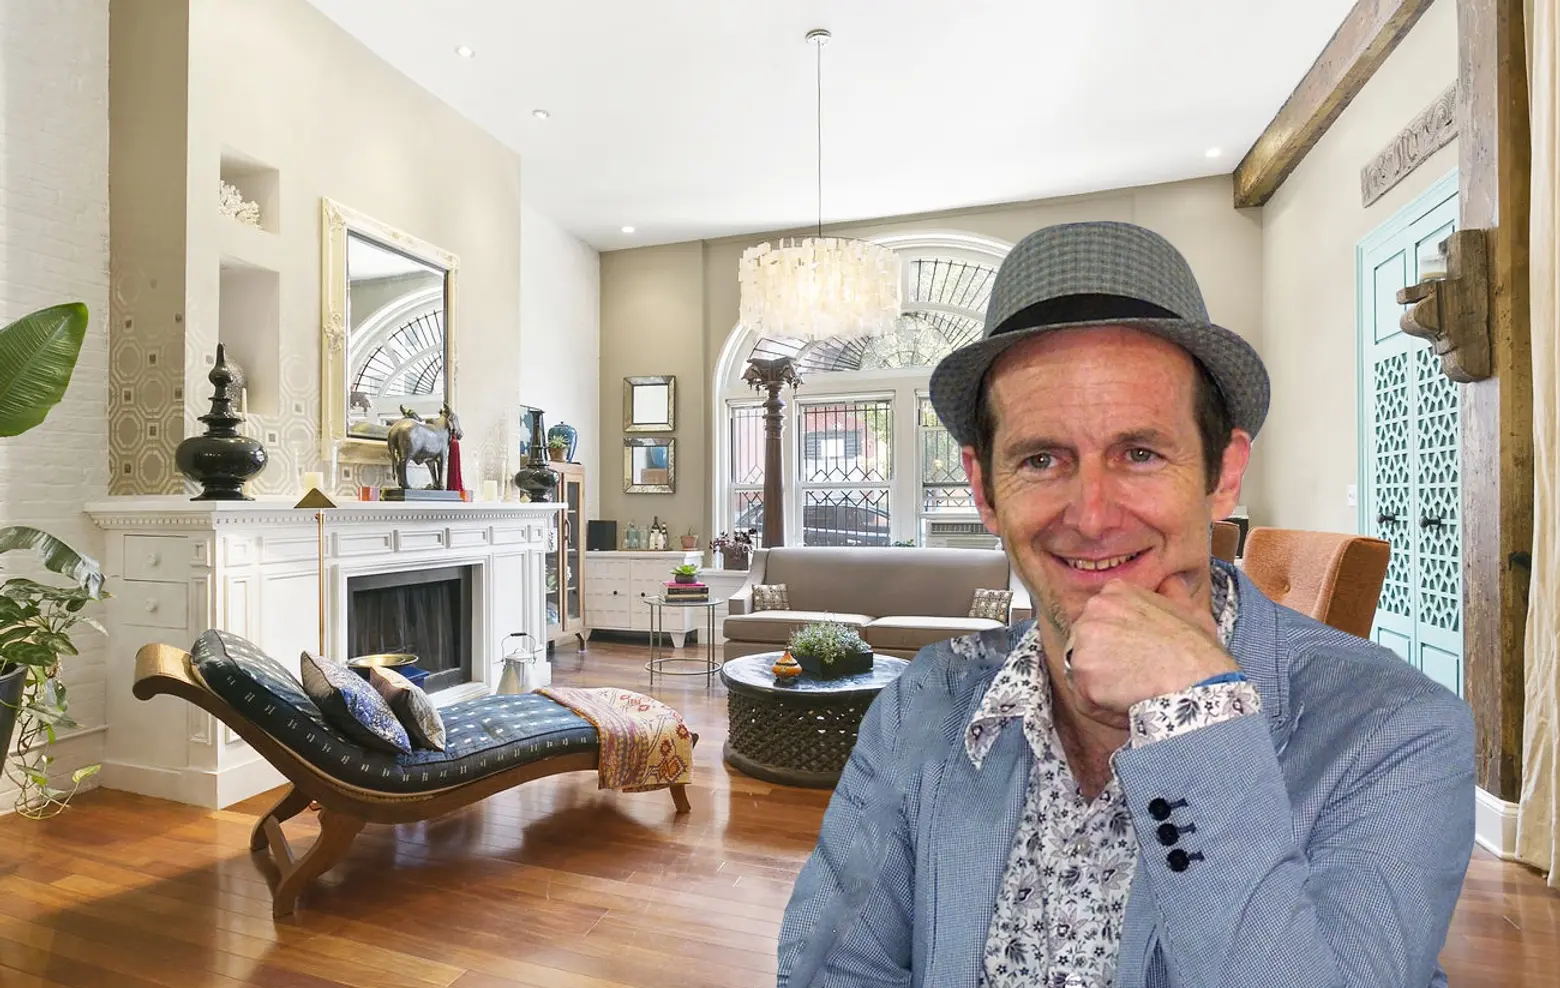 ‘True Blood’ actor Denis O’Hare sells landmarked Fort Greene carriage house duplex for $1.7M